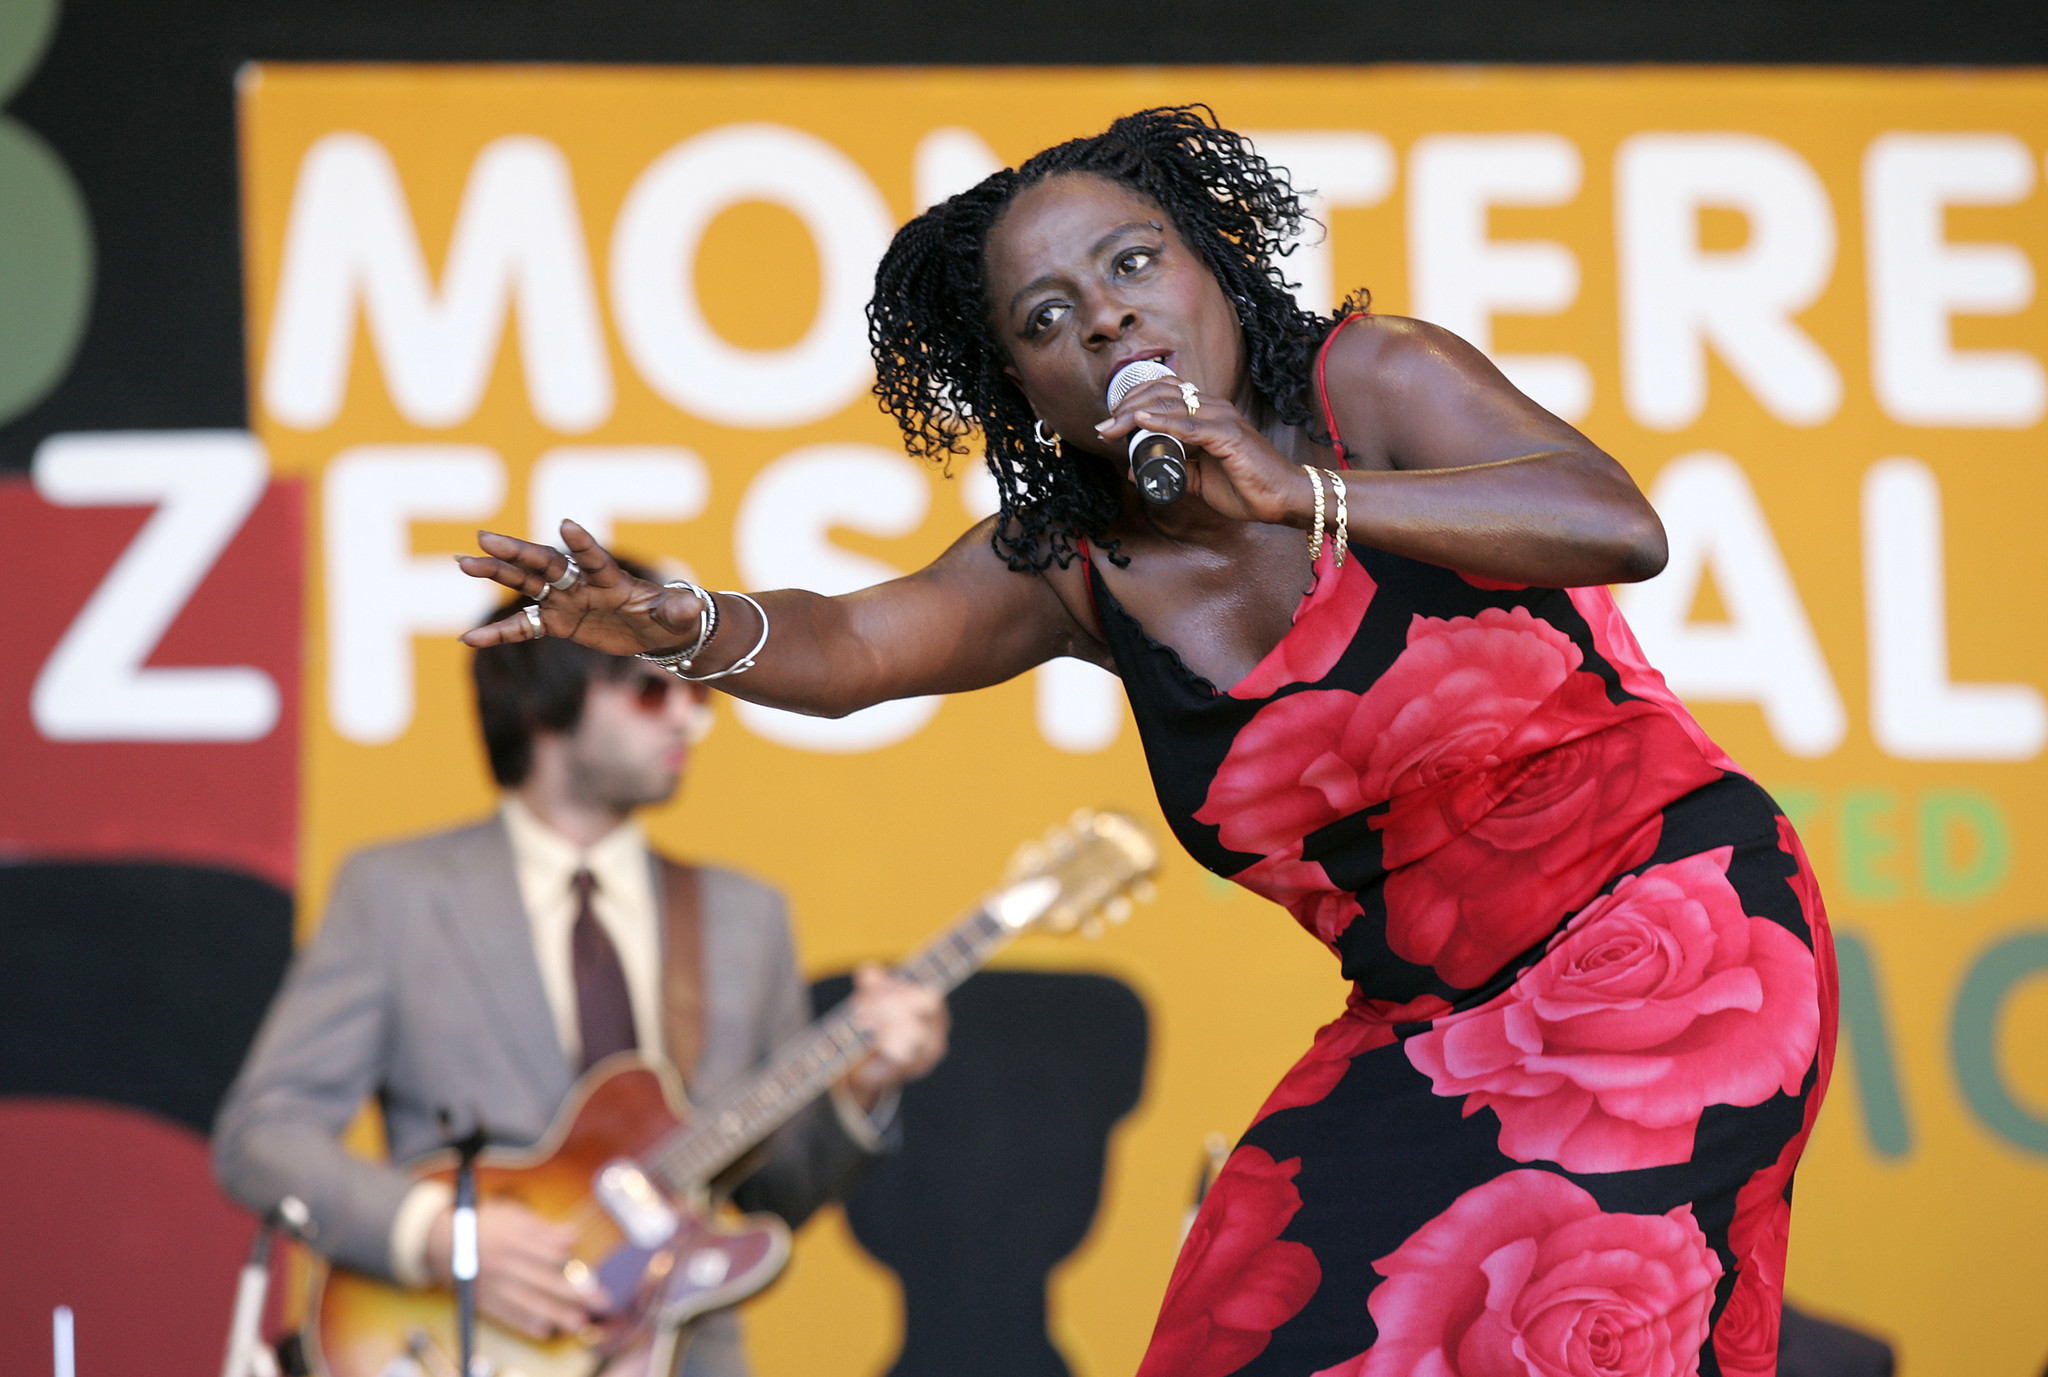 Sharon Jones in her own words - 'I don't need 15 background singers and dancers'